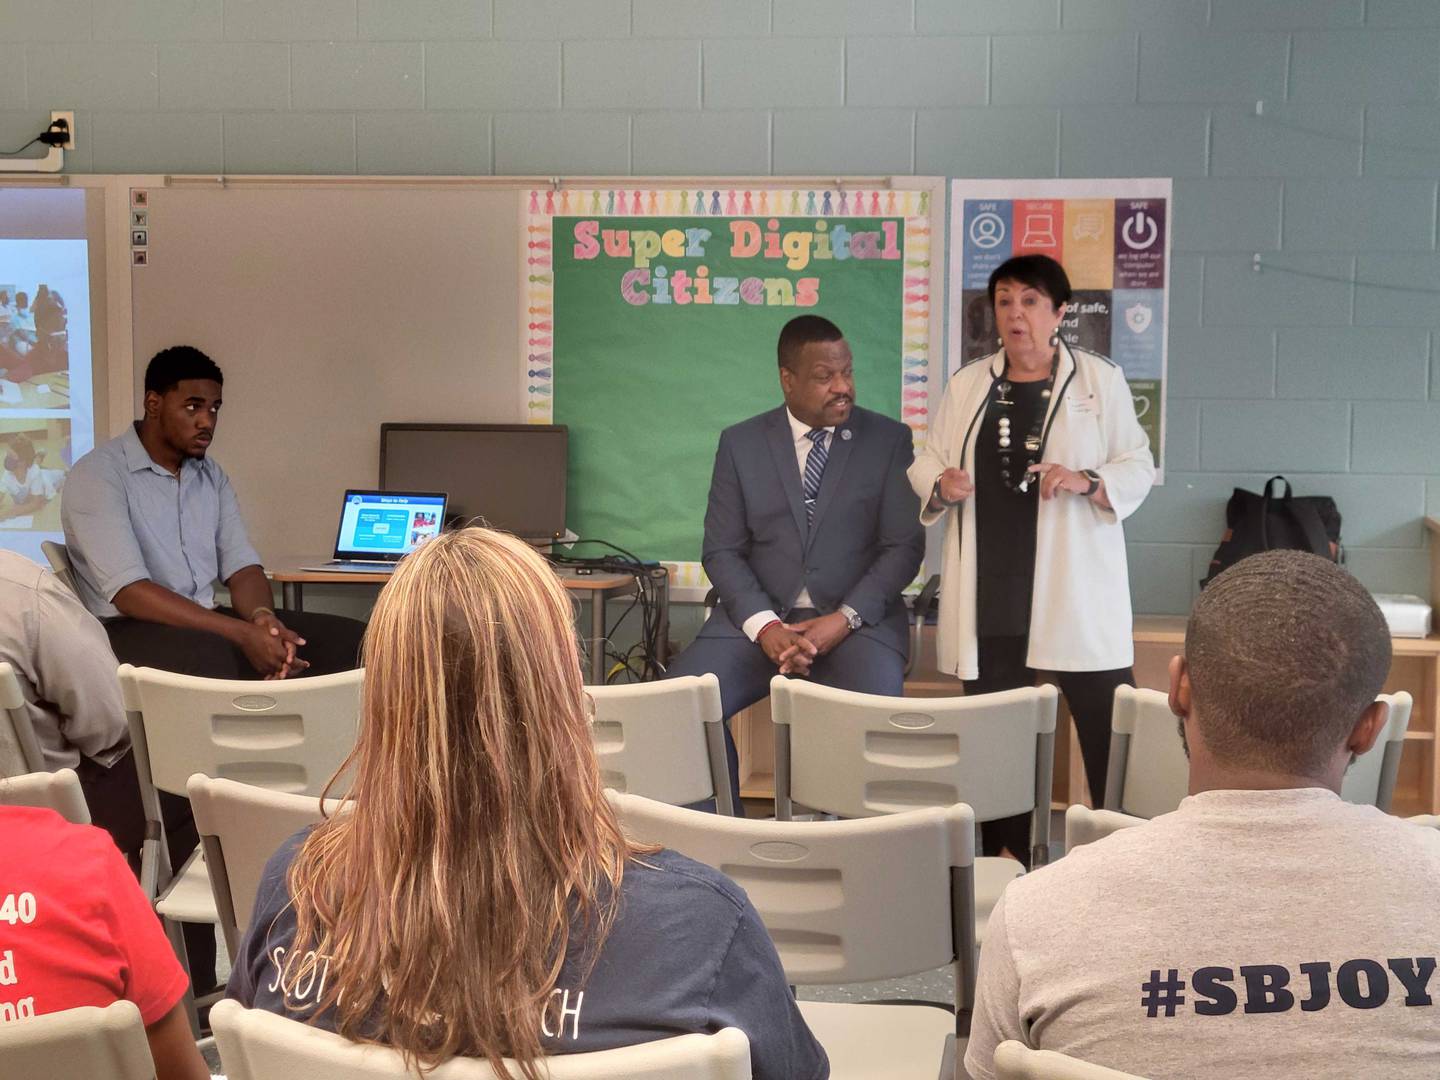 Superintendent Darryl Williams, left, and Deborah Phelps, executive director of The Education Foundation of Baltimore County Public Schools, addresses an audience at the system's first Partnership Fair on Wednesday.